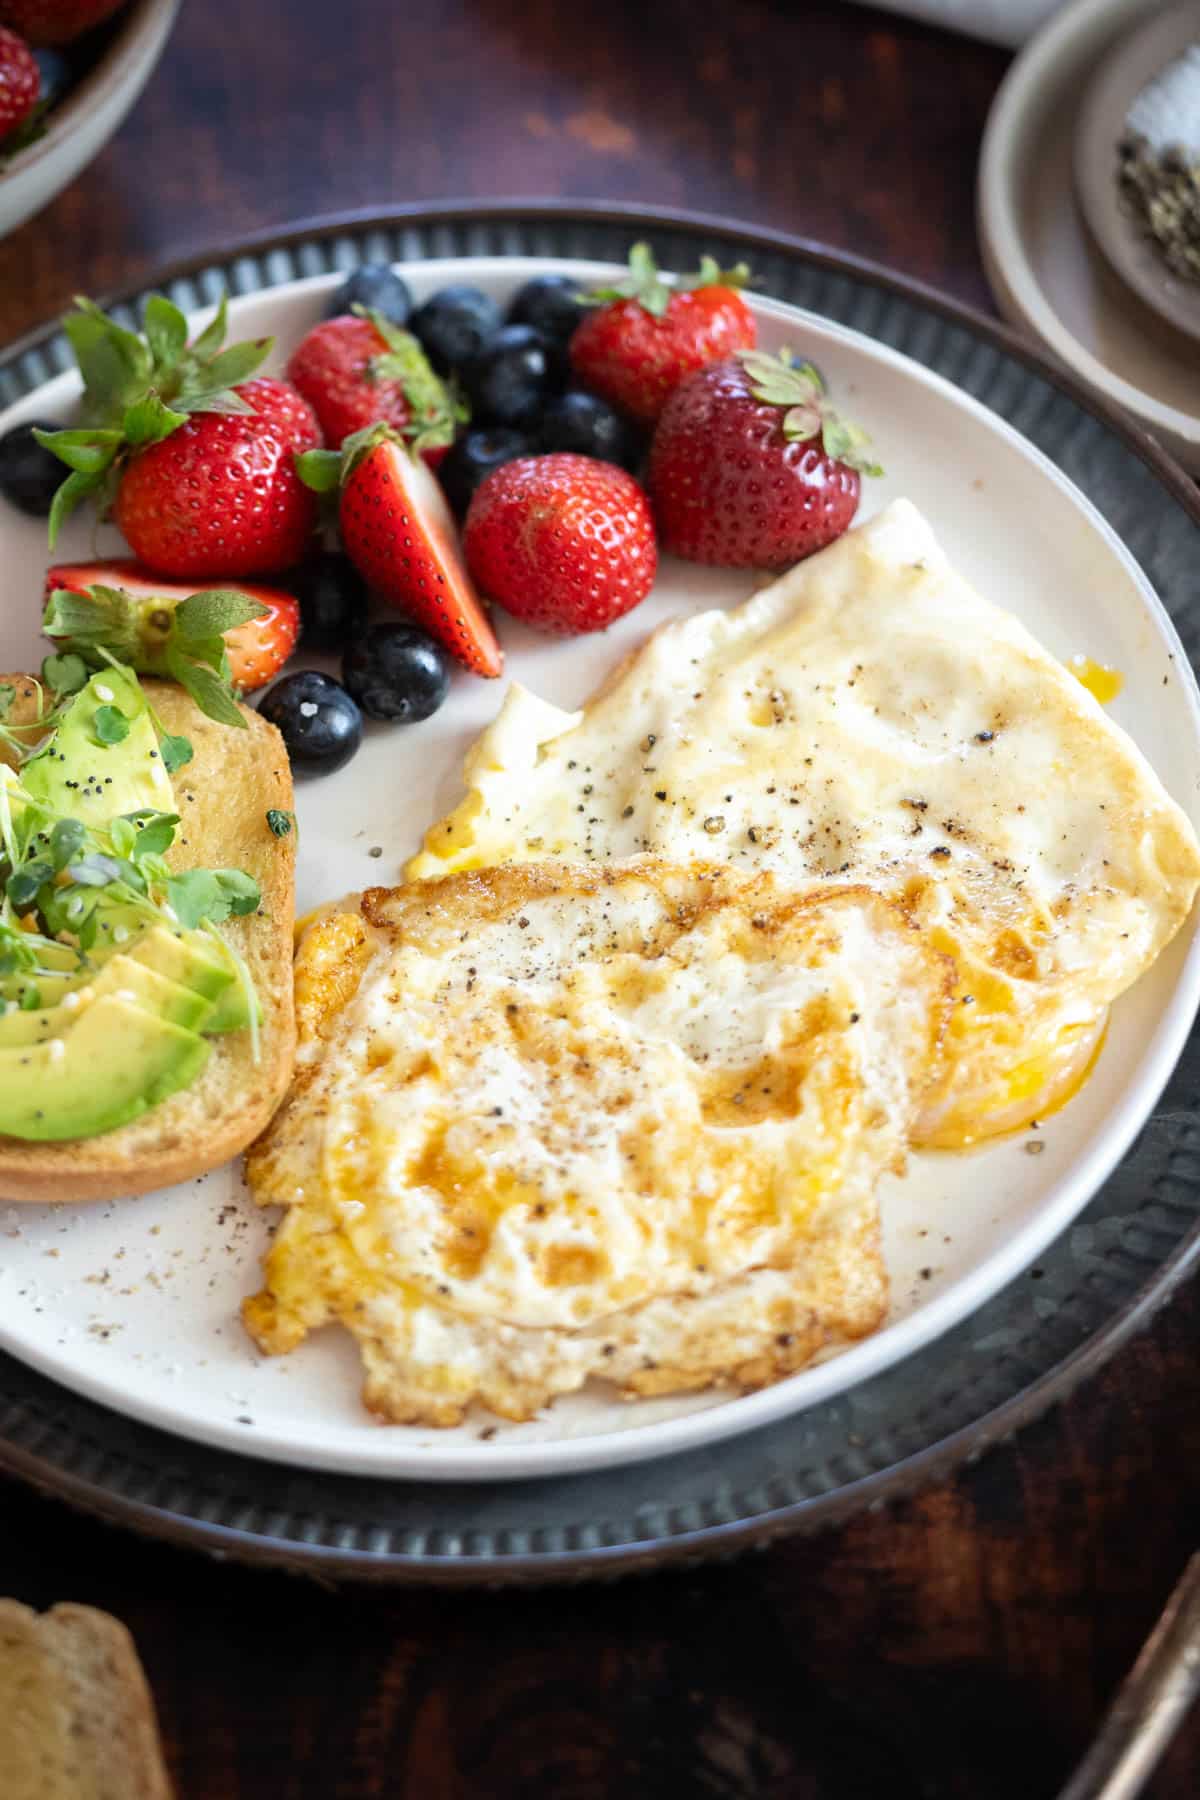 Fried egg with firm yolks on a plate with fruit and avocado toast.